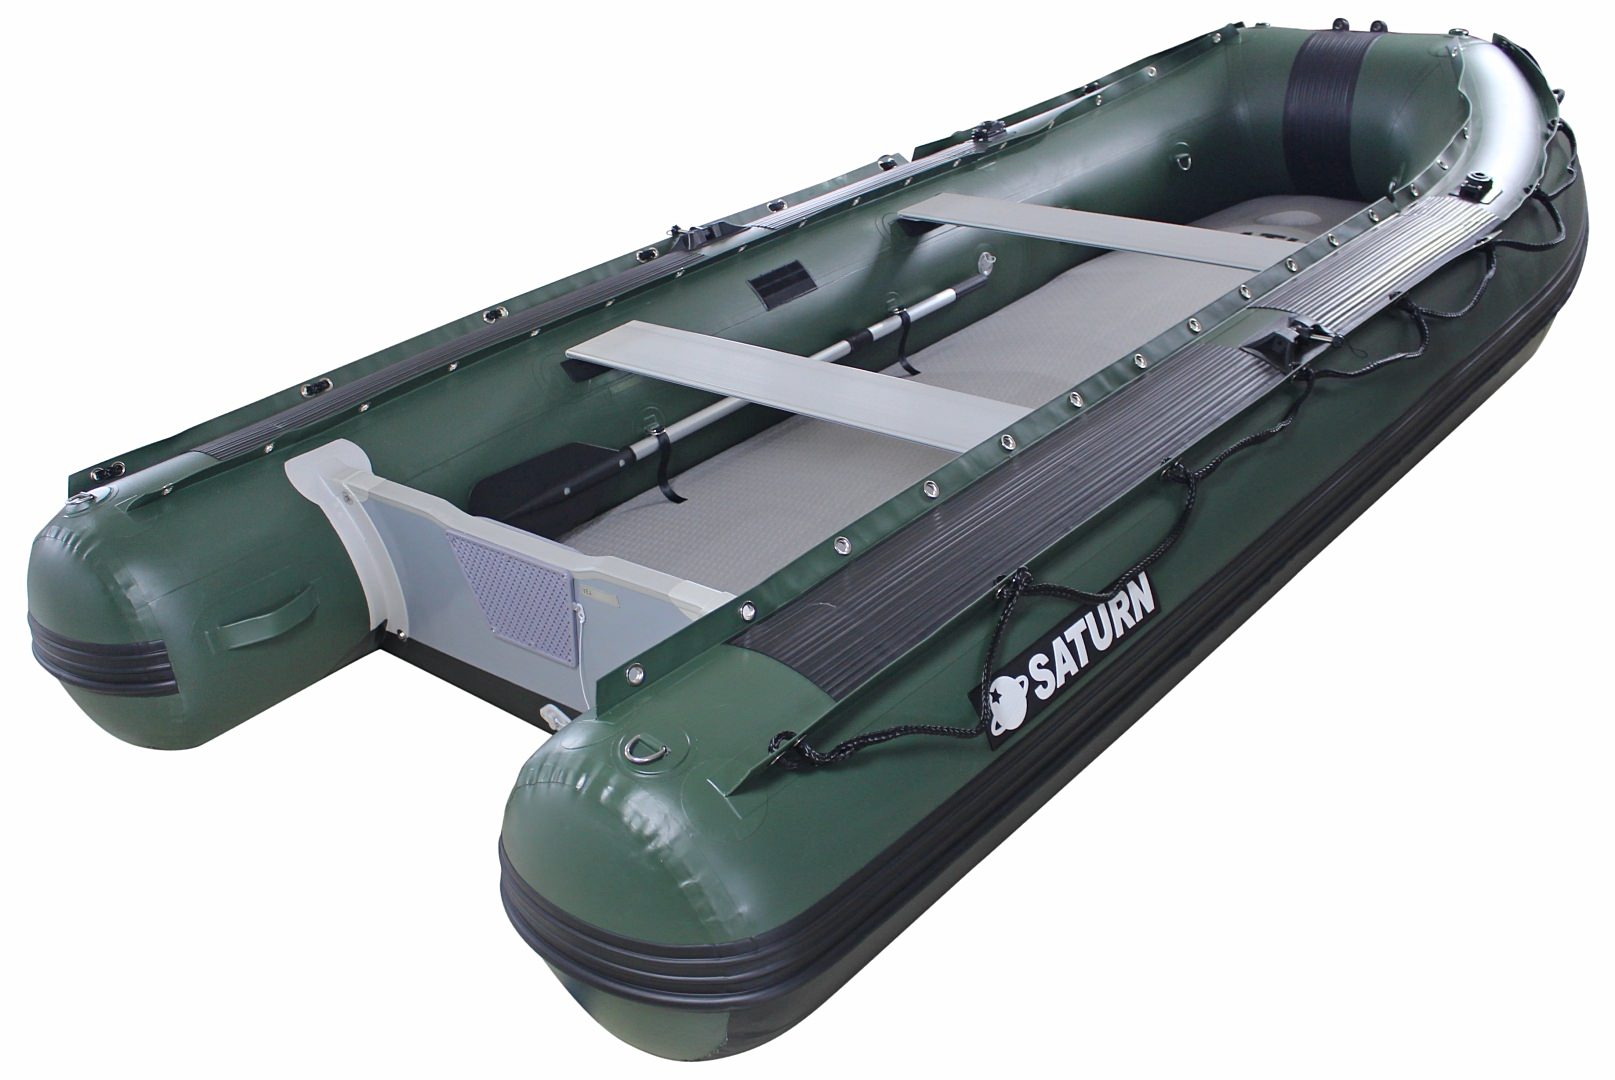 Versatile Inflatable Dinghy Yacht  Ideal for Fishing, Diving, and More –  Jack's Aqua Sports